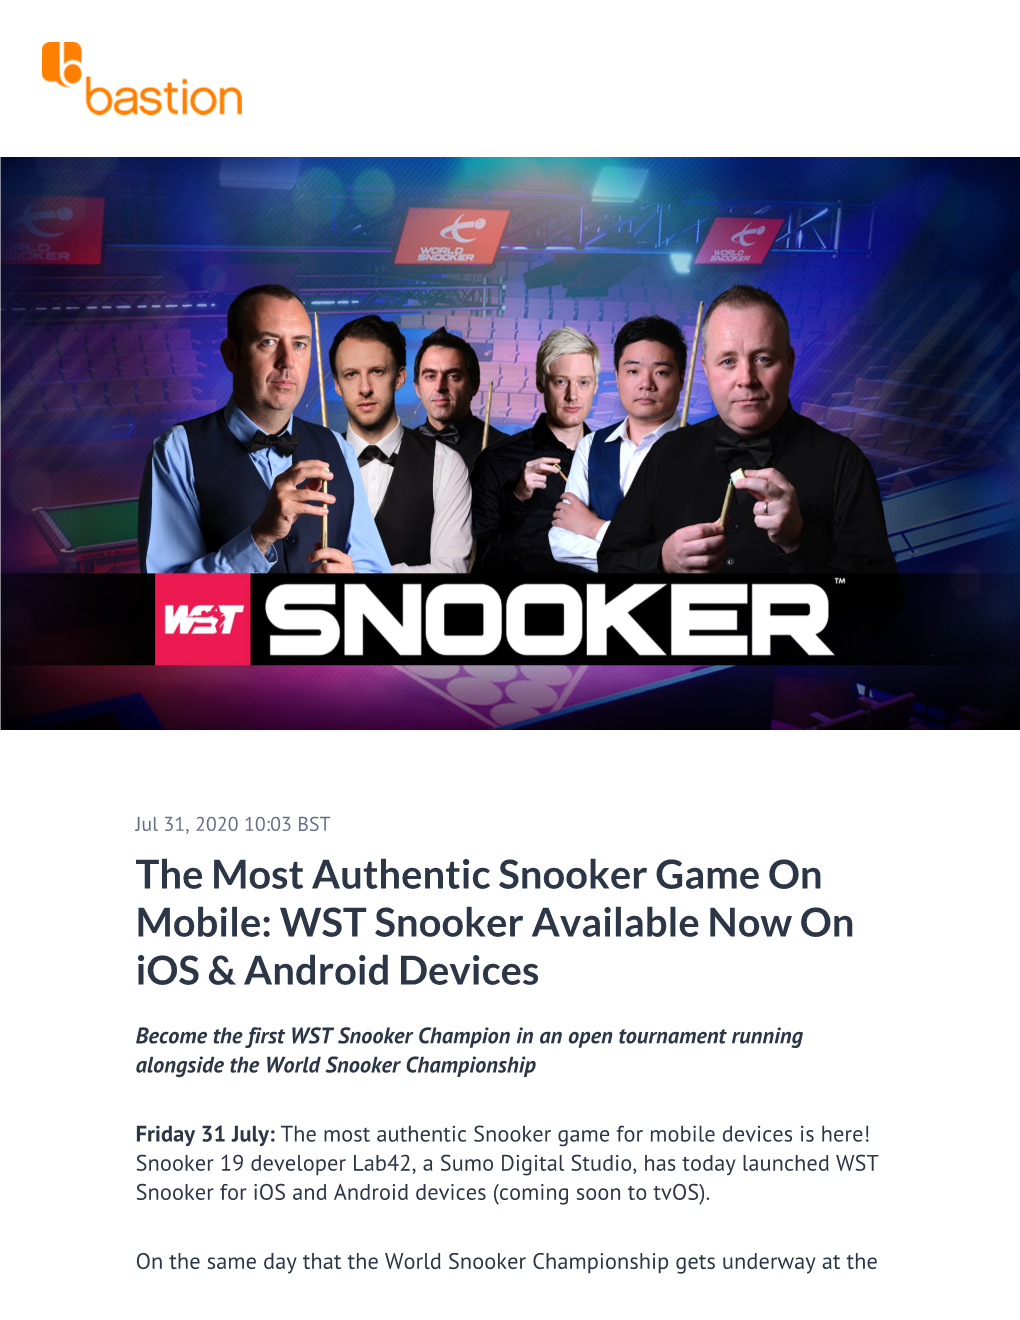 WST Snooker Available Now on Ios & Android Devices